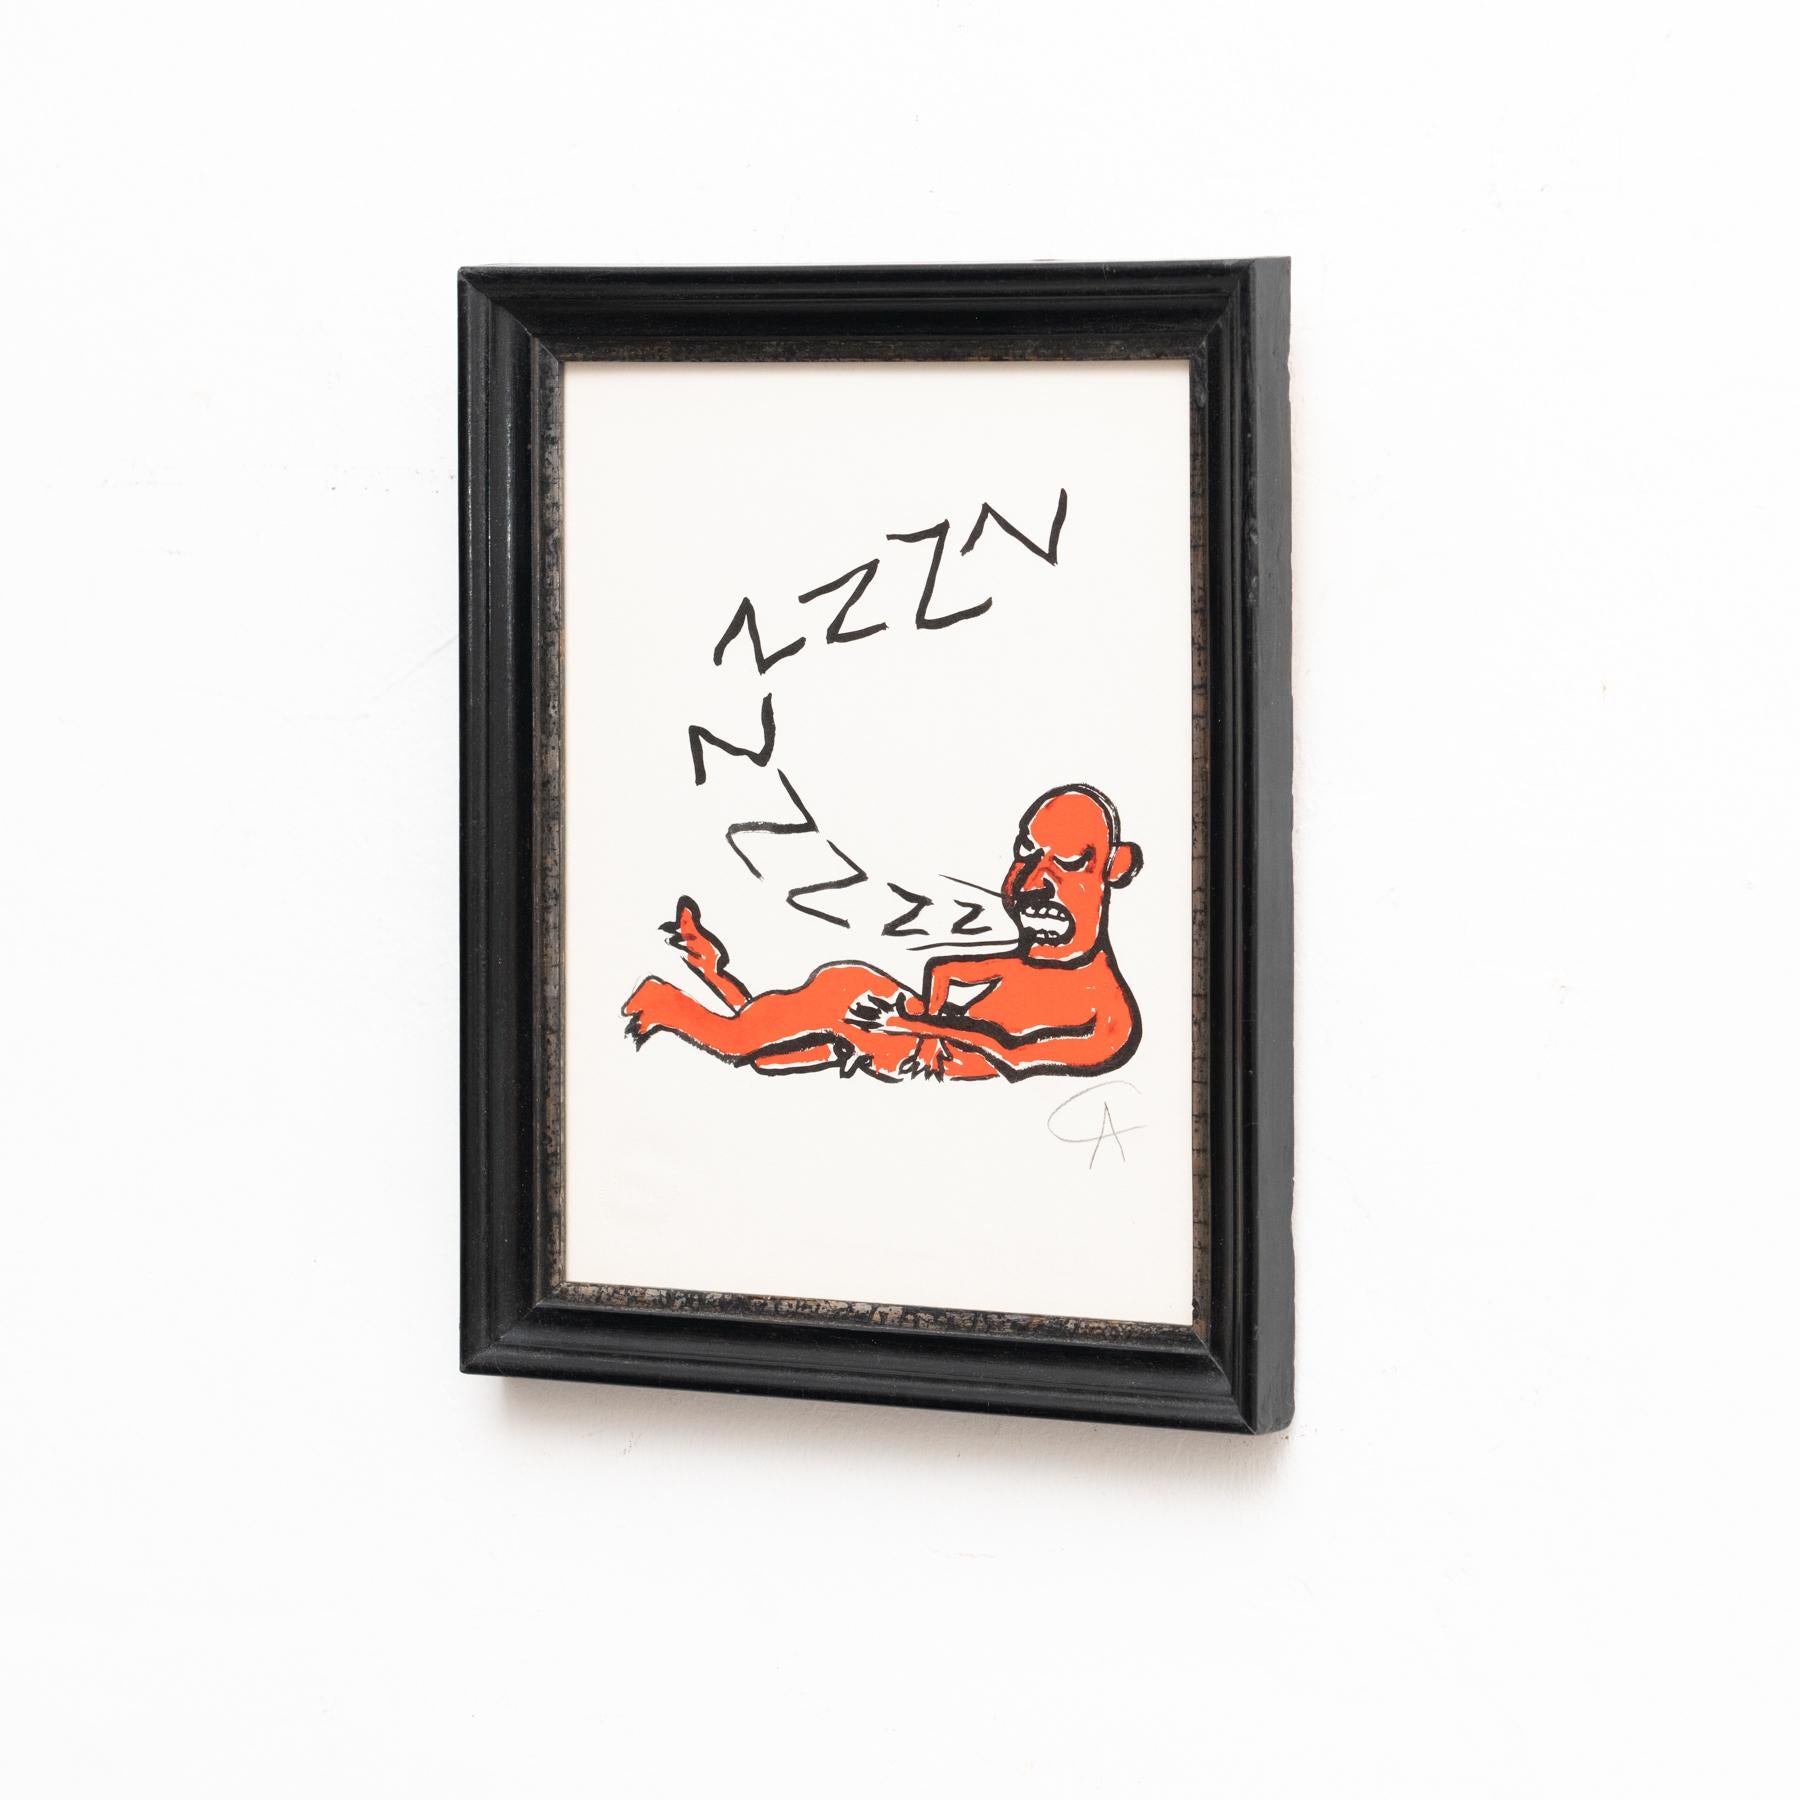 Signed 'Z' photolithography by Alexander Calder, 1973.

Stamped rotogravure reproduction of series by Bolaffiarte. Limited edition of 5000.

Framed and signed in pencil.

In good original condition, with minor wear consistent with age and use,